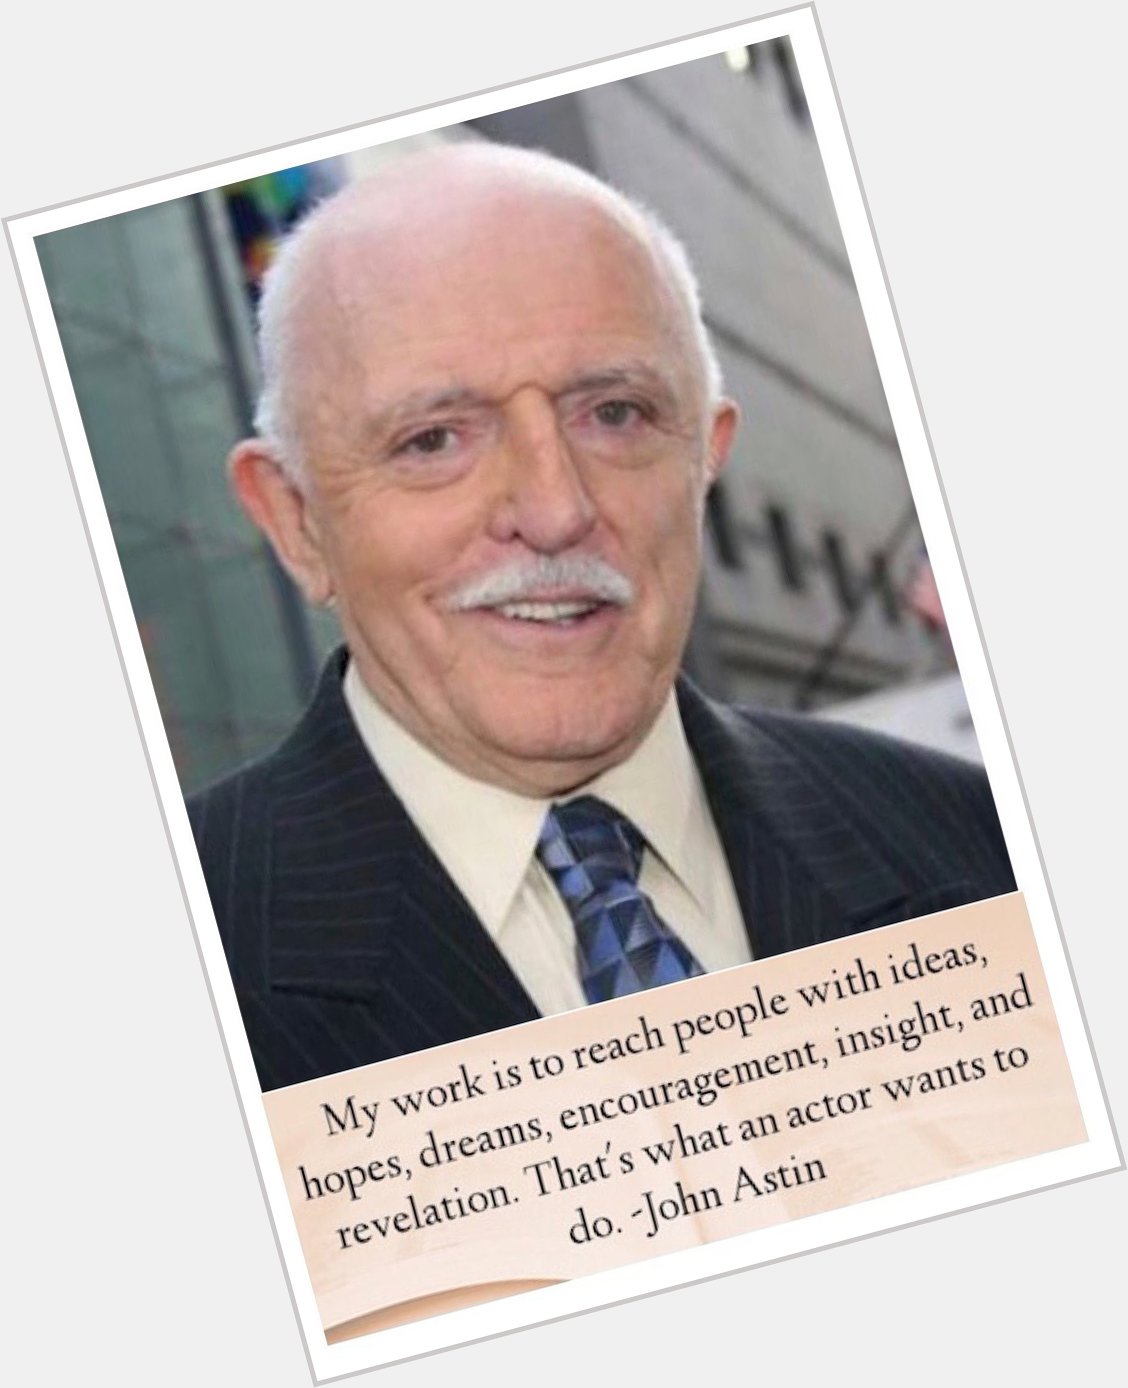 Happy Birthday to John Astin - from the original Addams Family television series. 